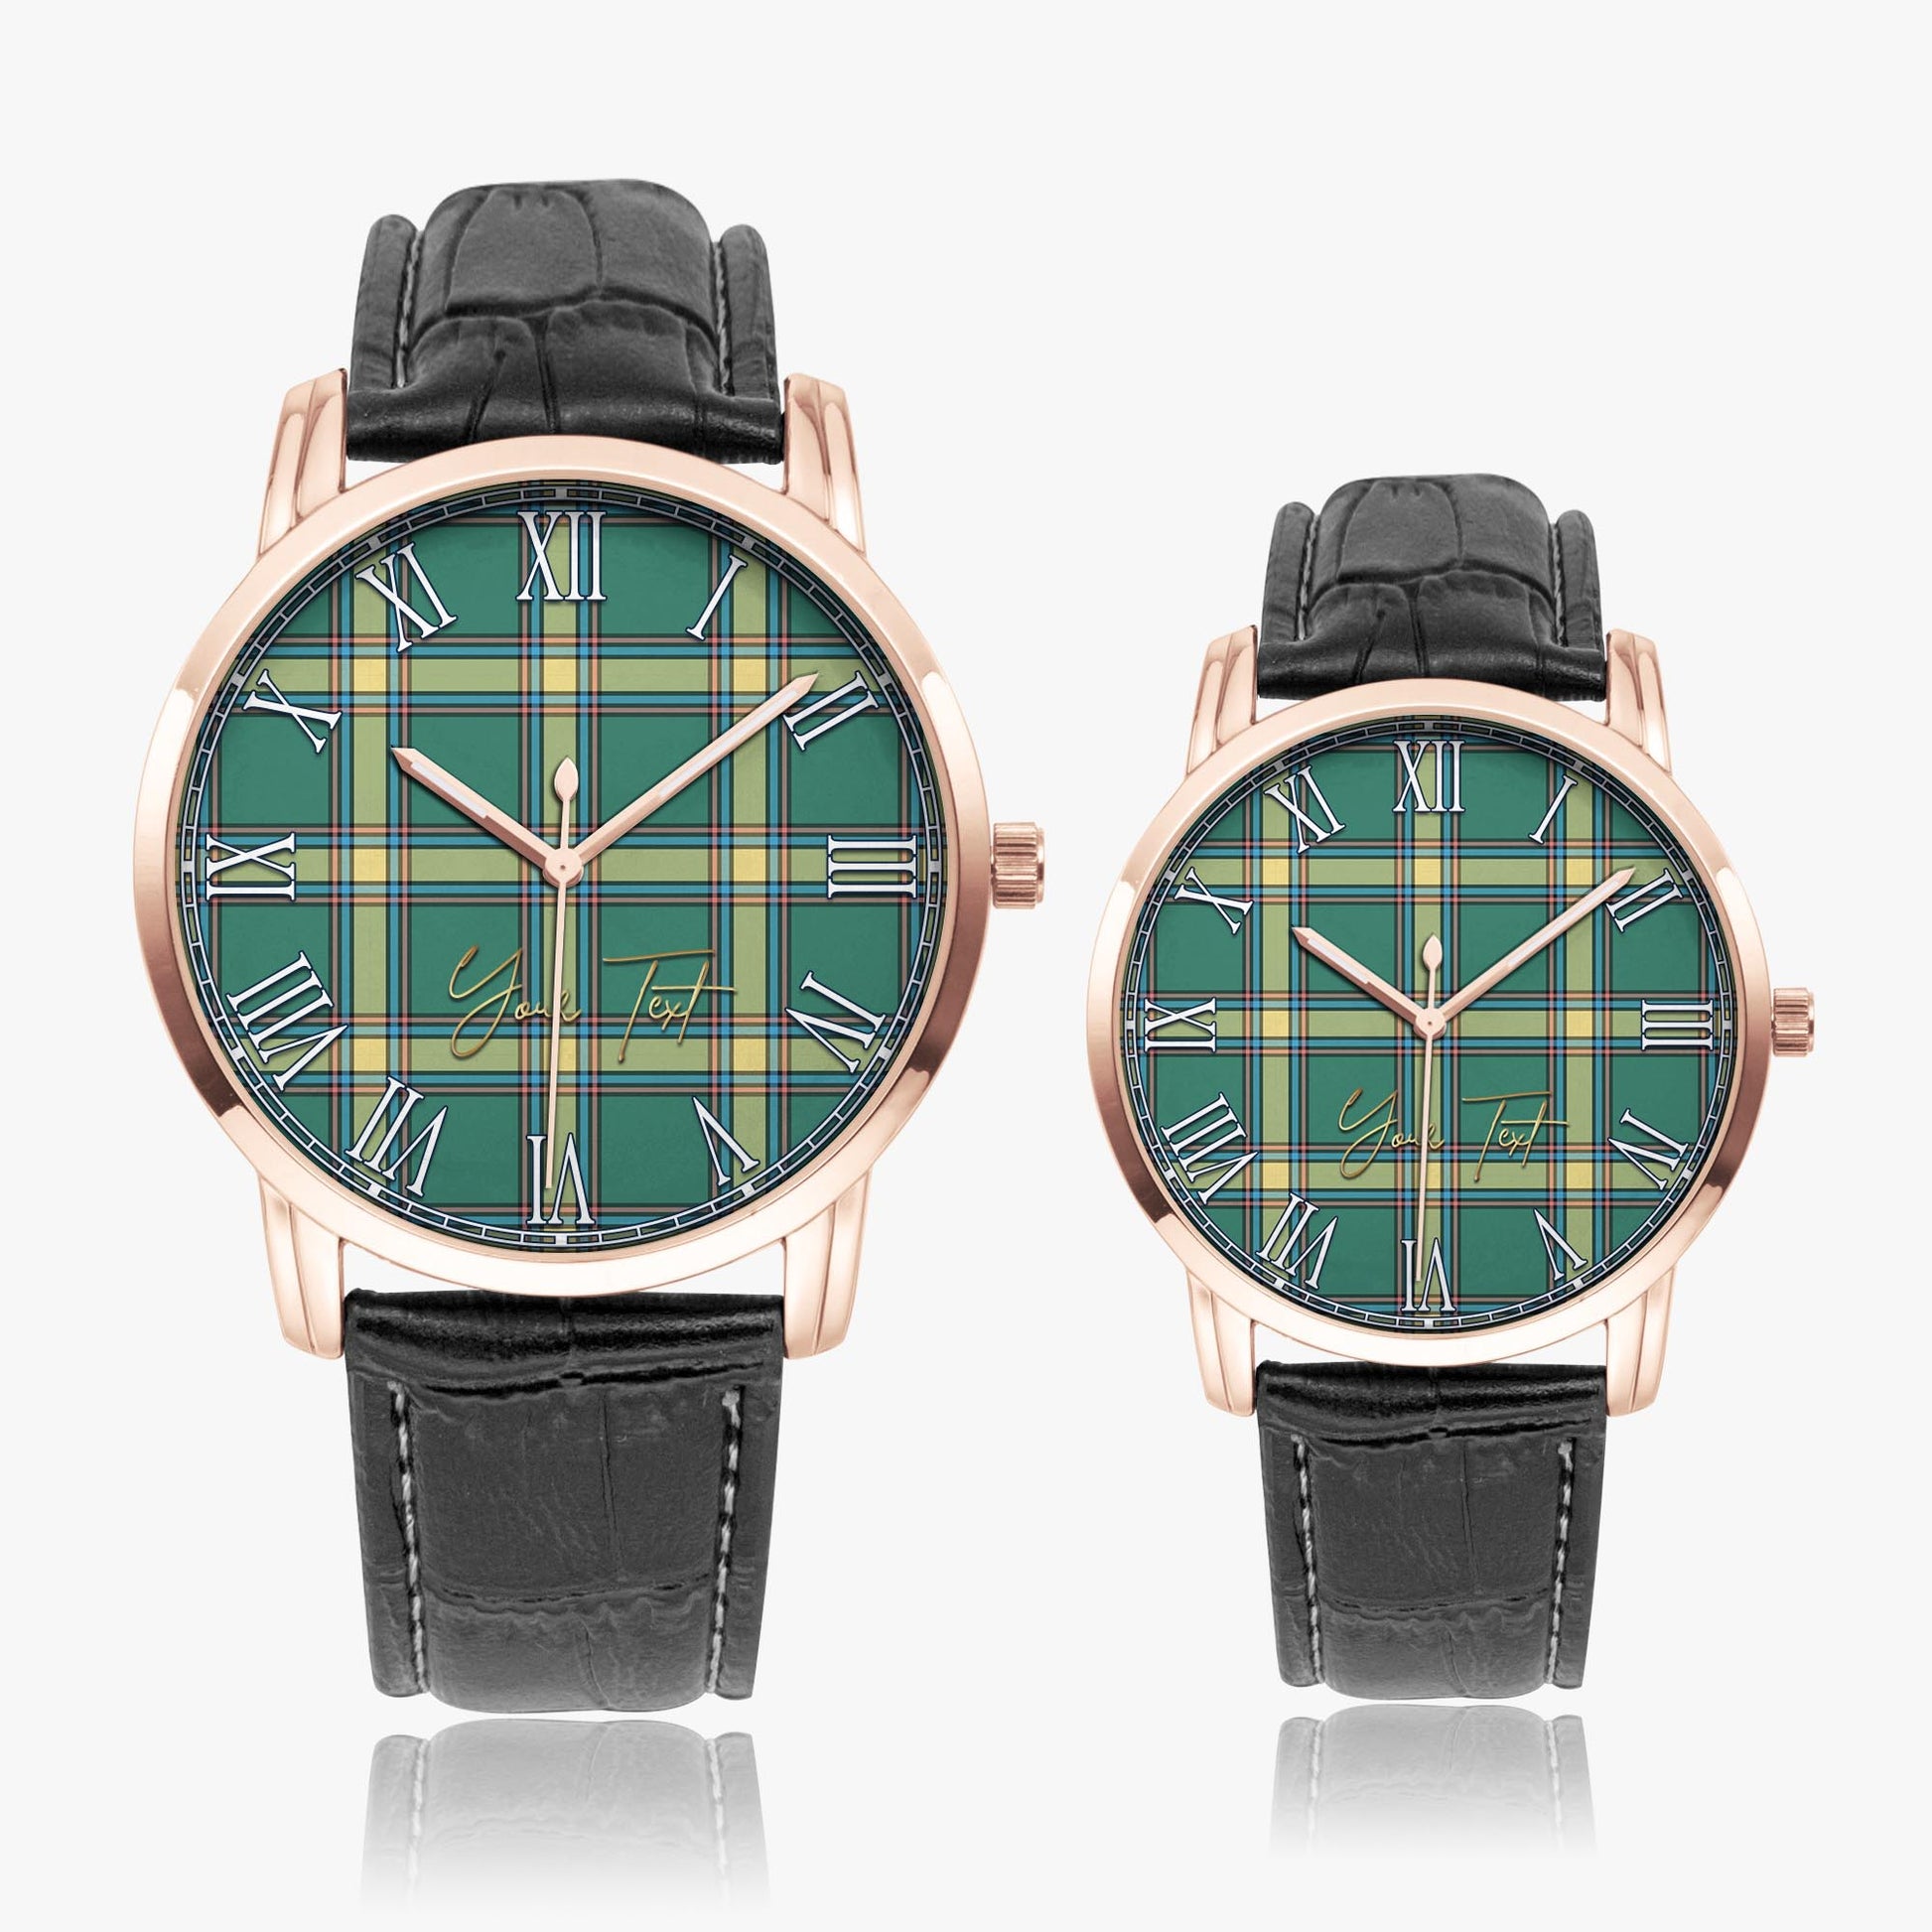 Alberta Province Canada Tartan Personalized Your Text Leather Trap Quartz Watch Wide Type Rose Gold Case With Black Leather Strap - Tartanvibesclothing